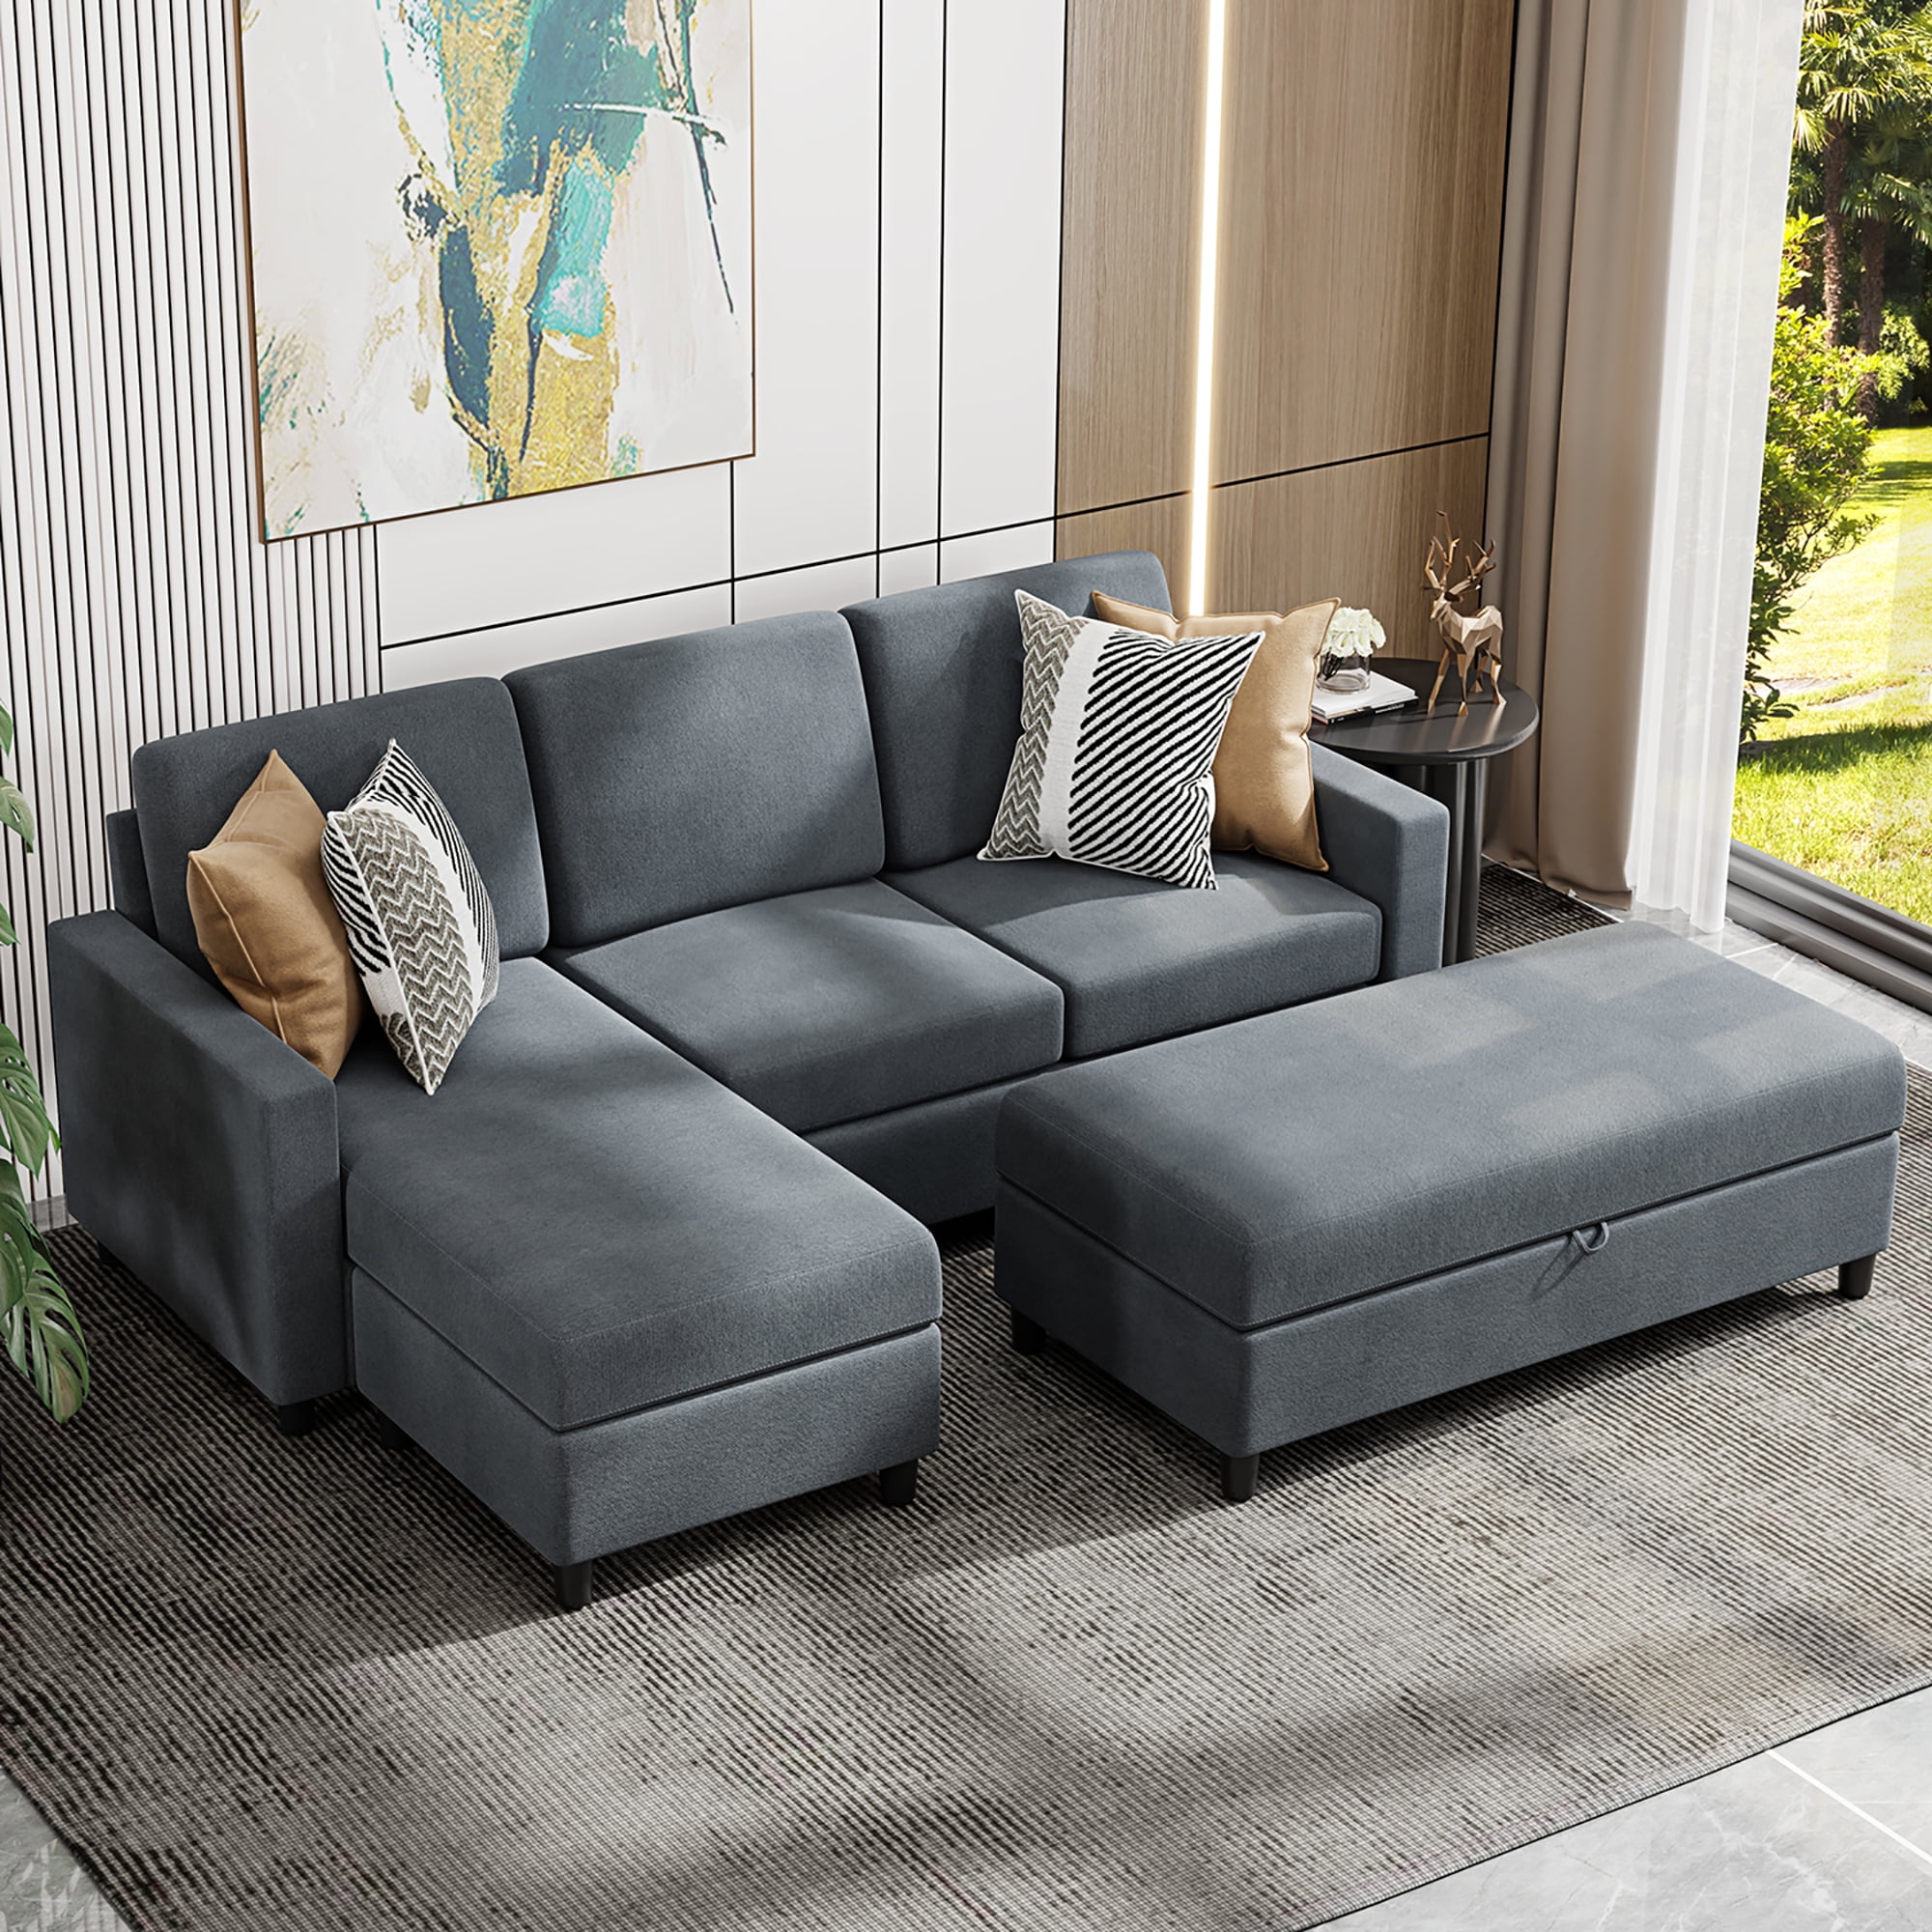 Convertible Sectional Sofa Couch With Storage Ottoman L Shaped Wide Reversible Chaise Linen Fabric Charcoal Grey Black